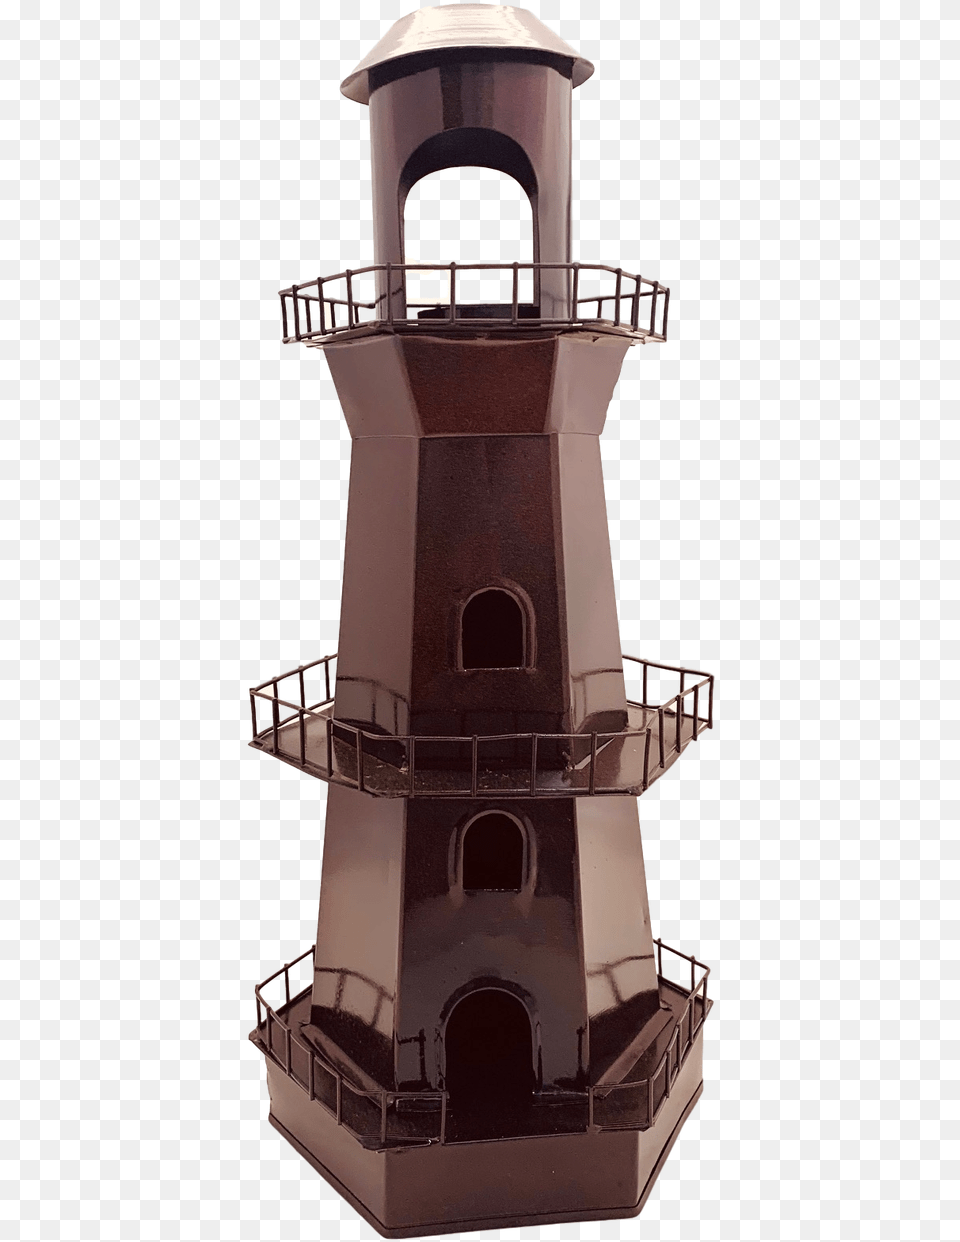 Lighthouse, Architecture, Bell Tower, Building, Tower Png